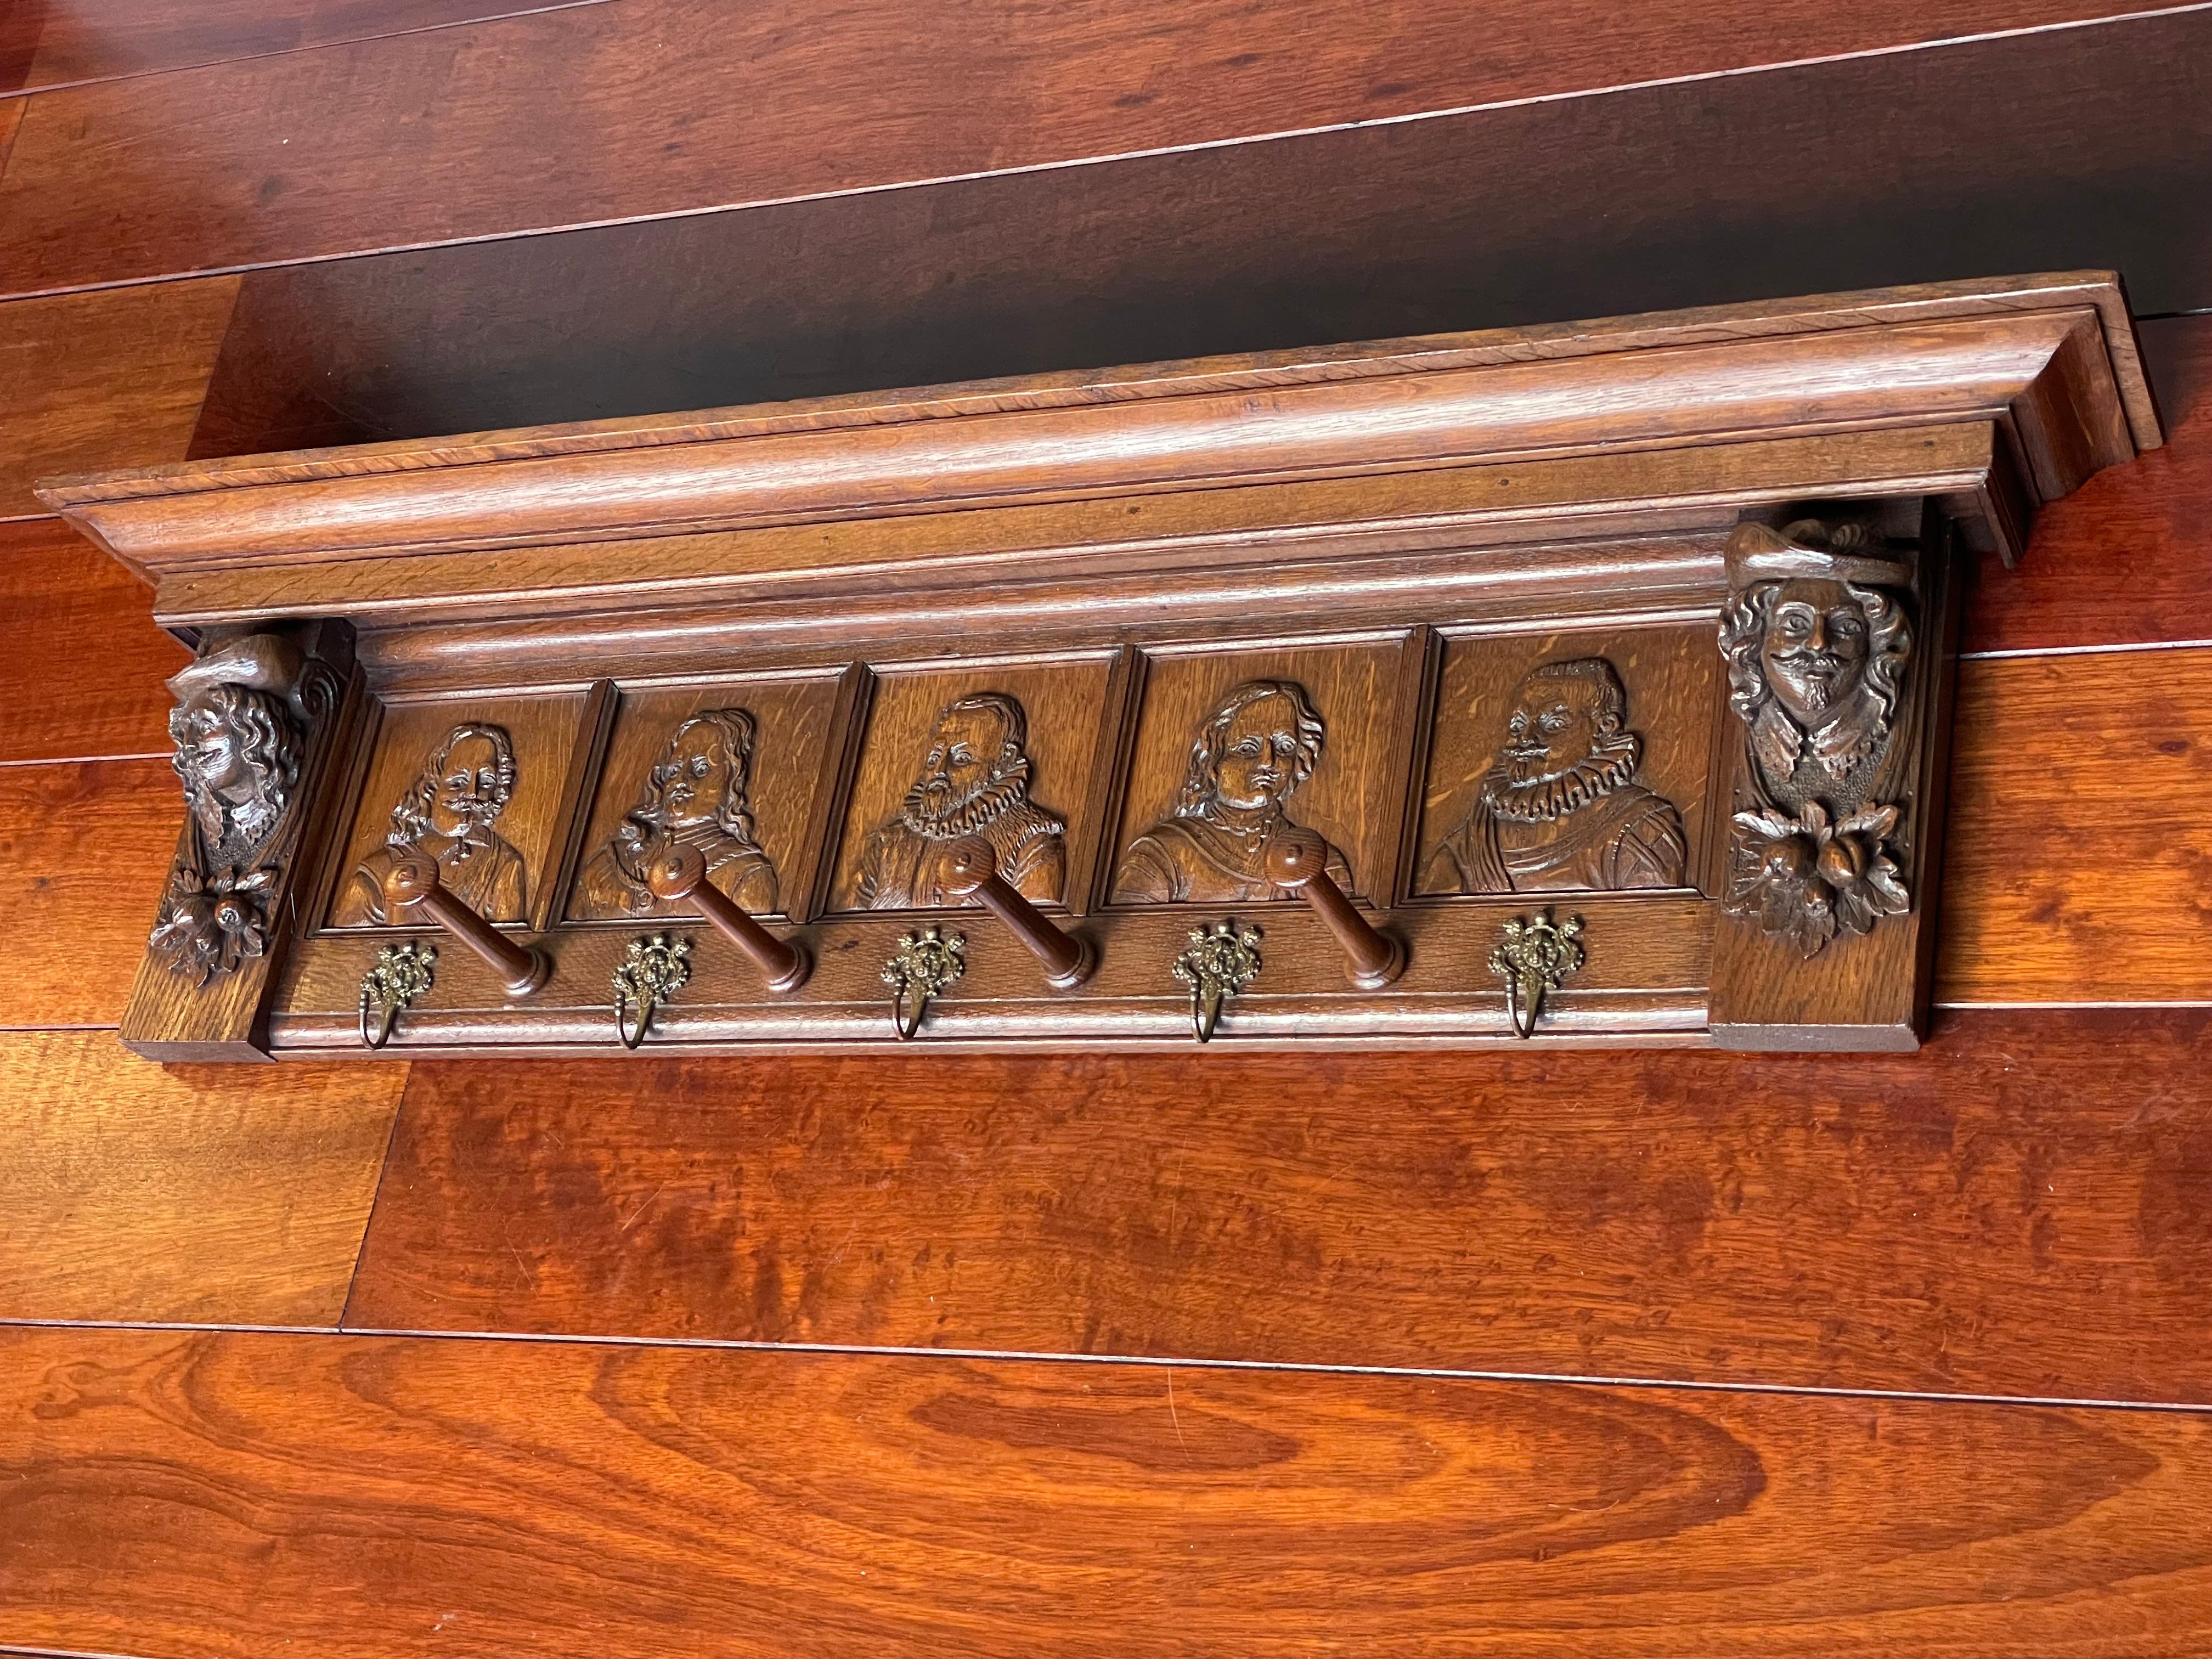 Unique and incredibly stylish Dutch antique coat rack, celebrating 'De Nachtwacht'.

This striking antique Dutch coat rack is special, practical and highly decorative. It is special and unique, because this Renaissance Revival wall coat rack was